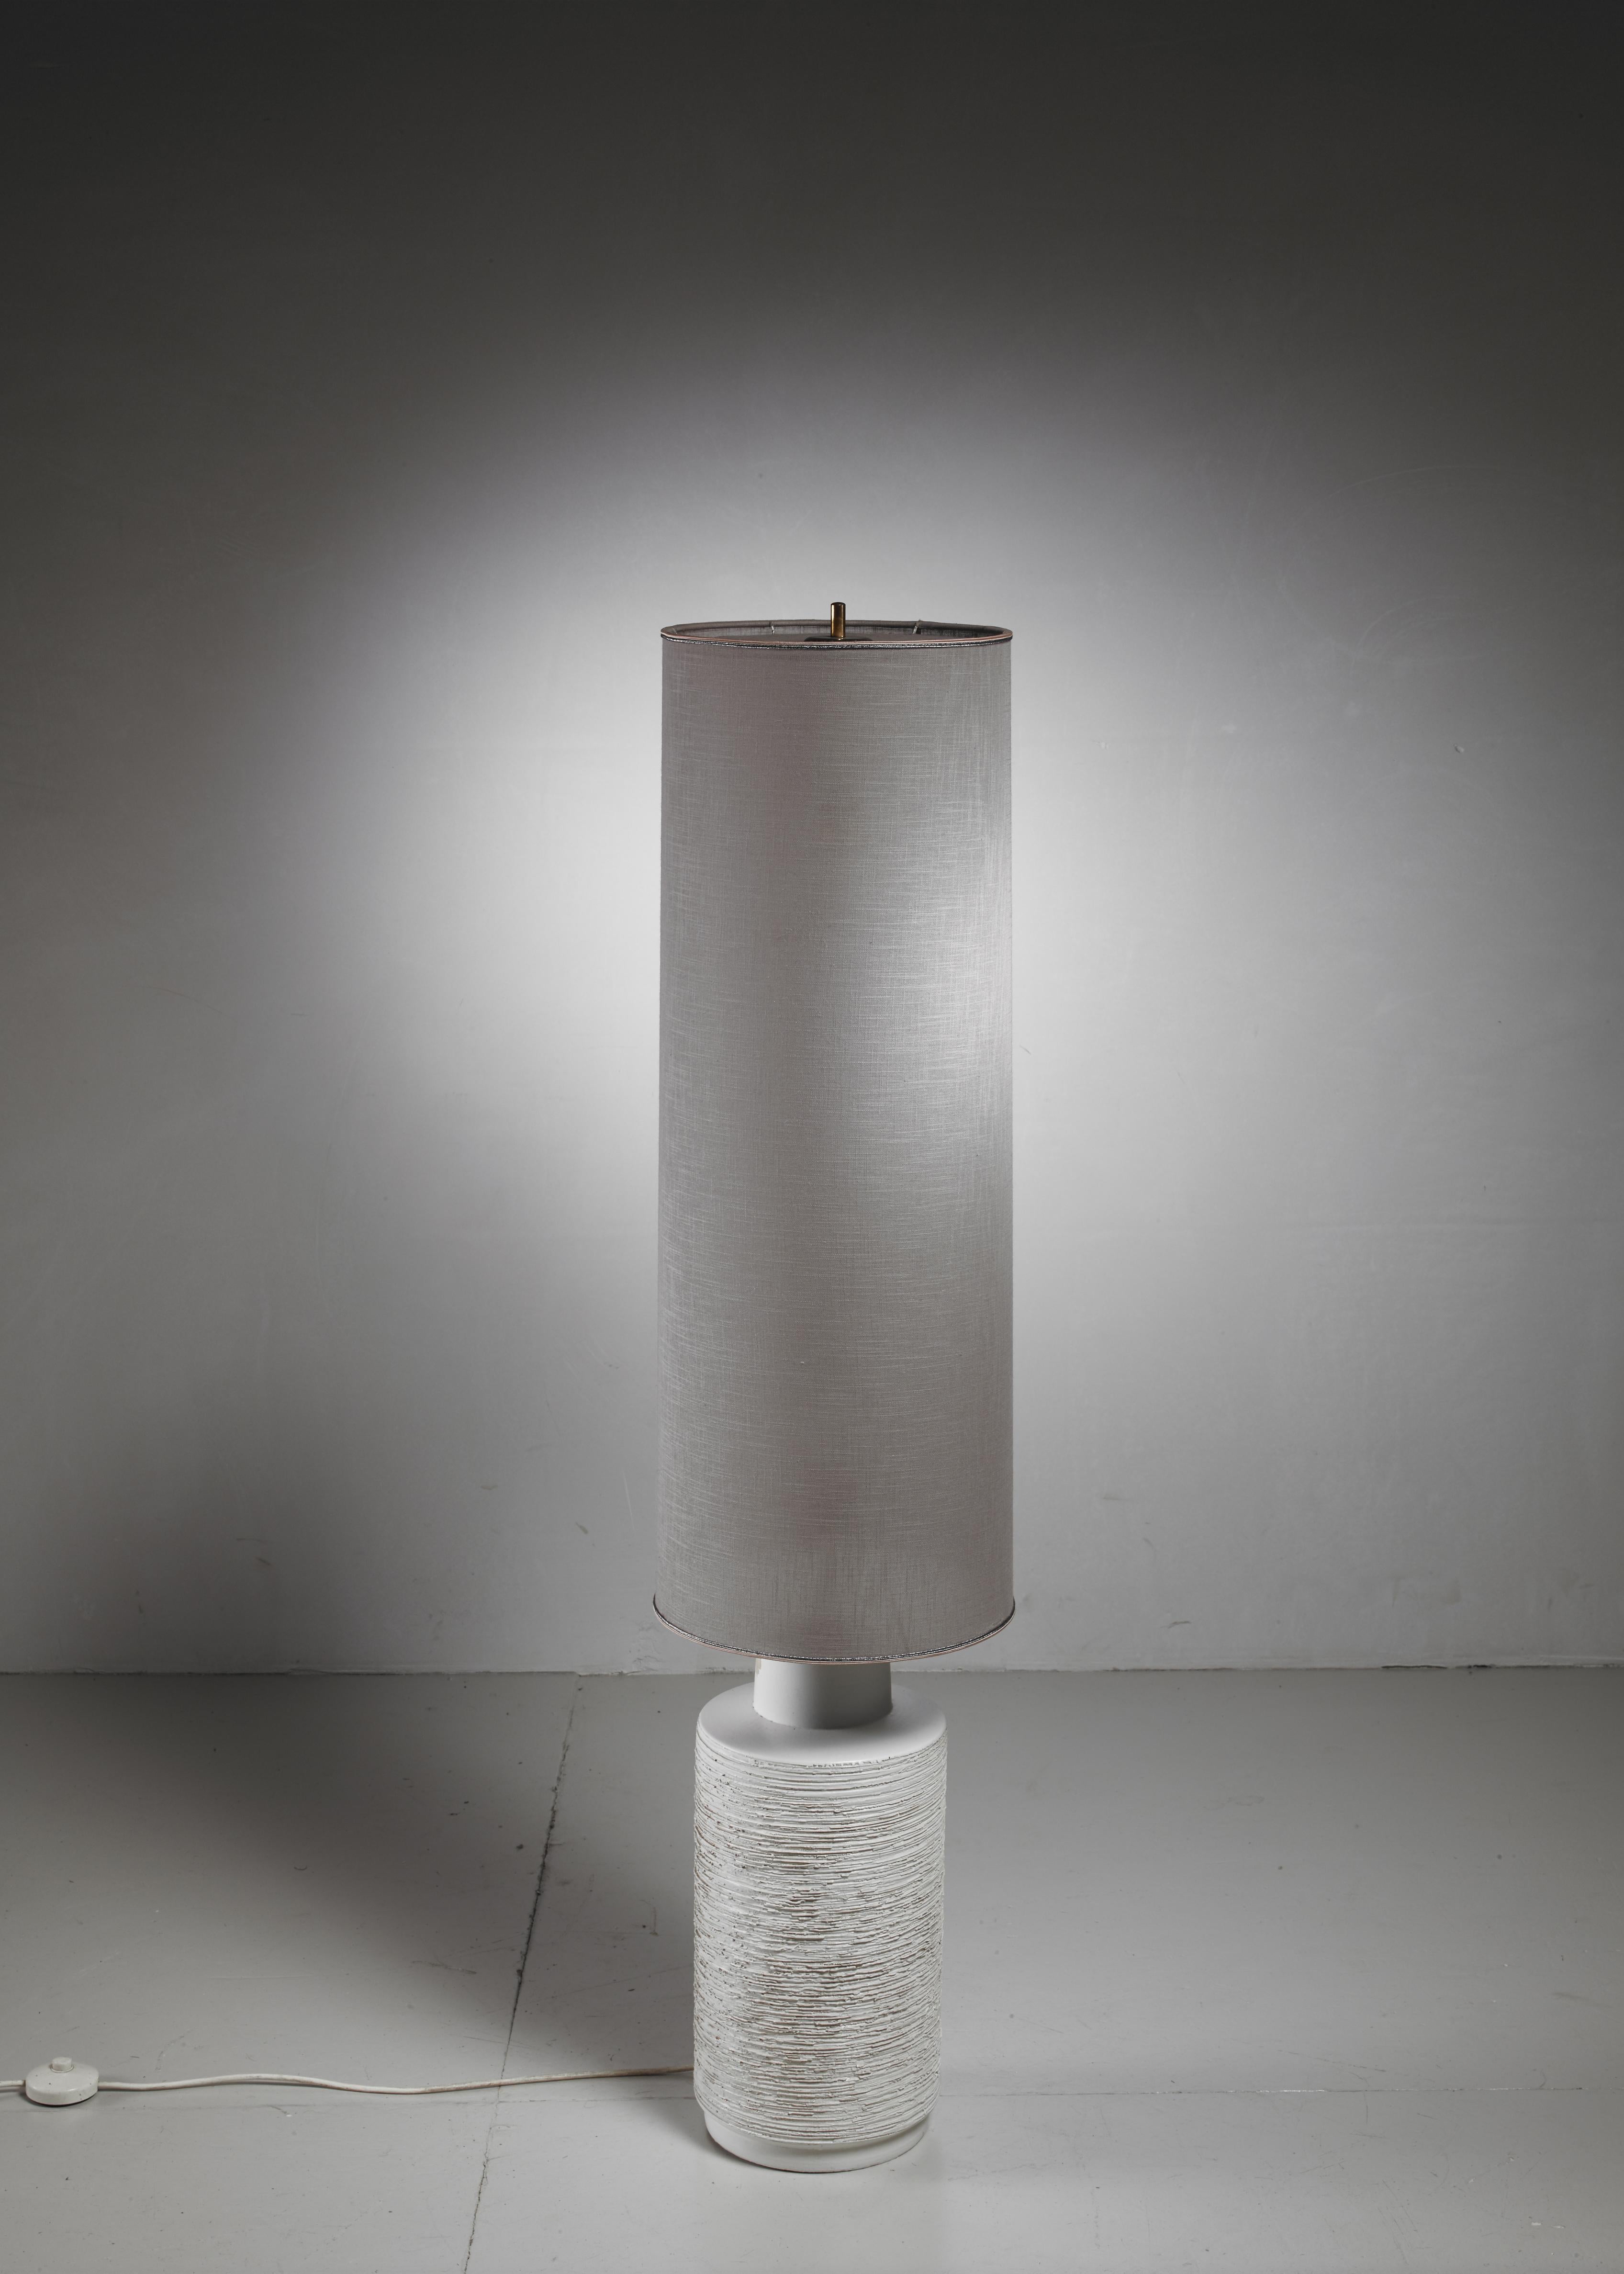 Italian Off-White Ceramic Floor Lamp with Large Cylindric Shade, Italy, 1960s For Sale